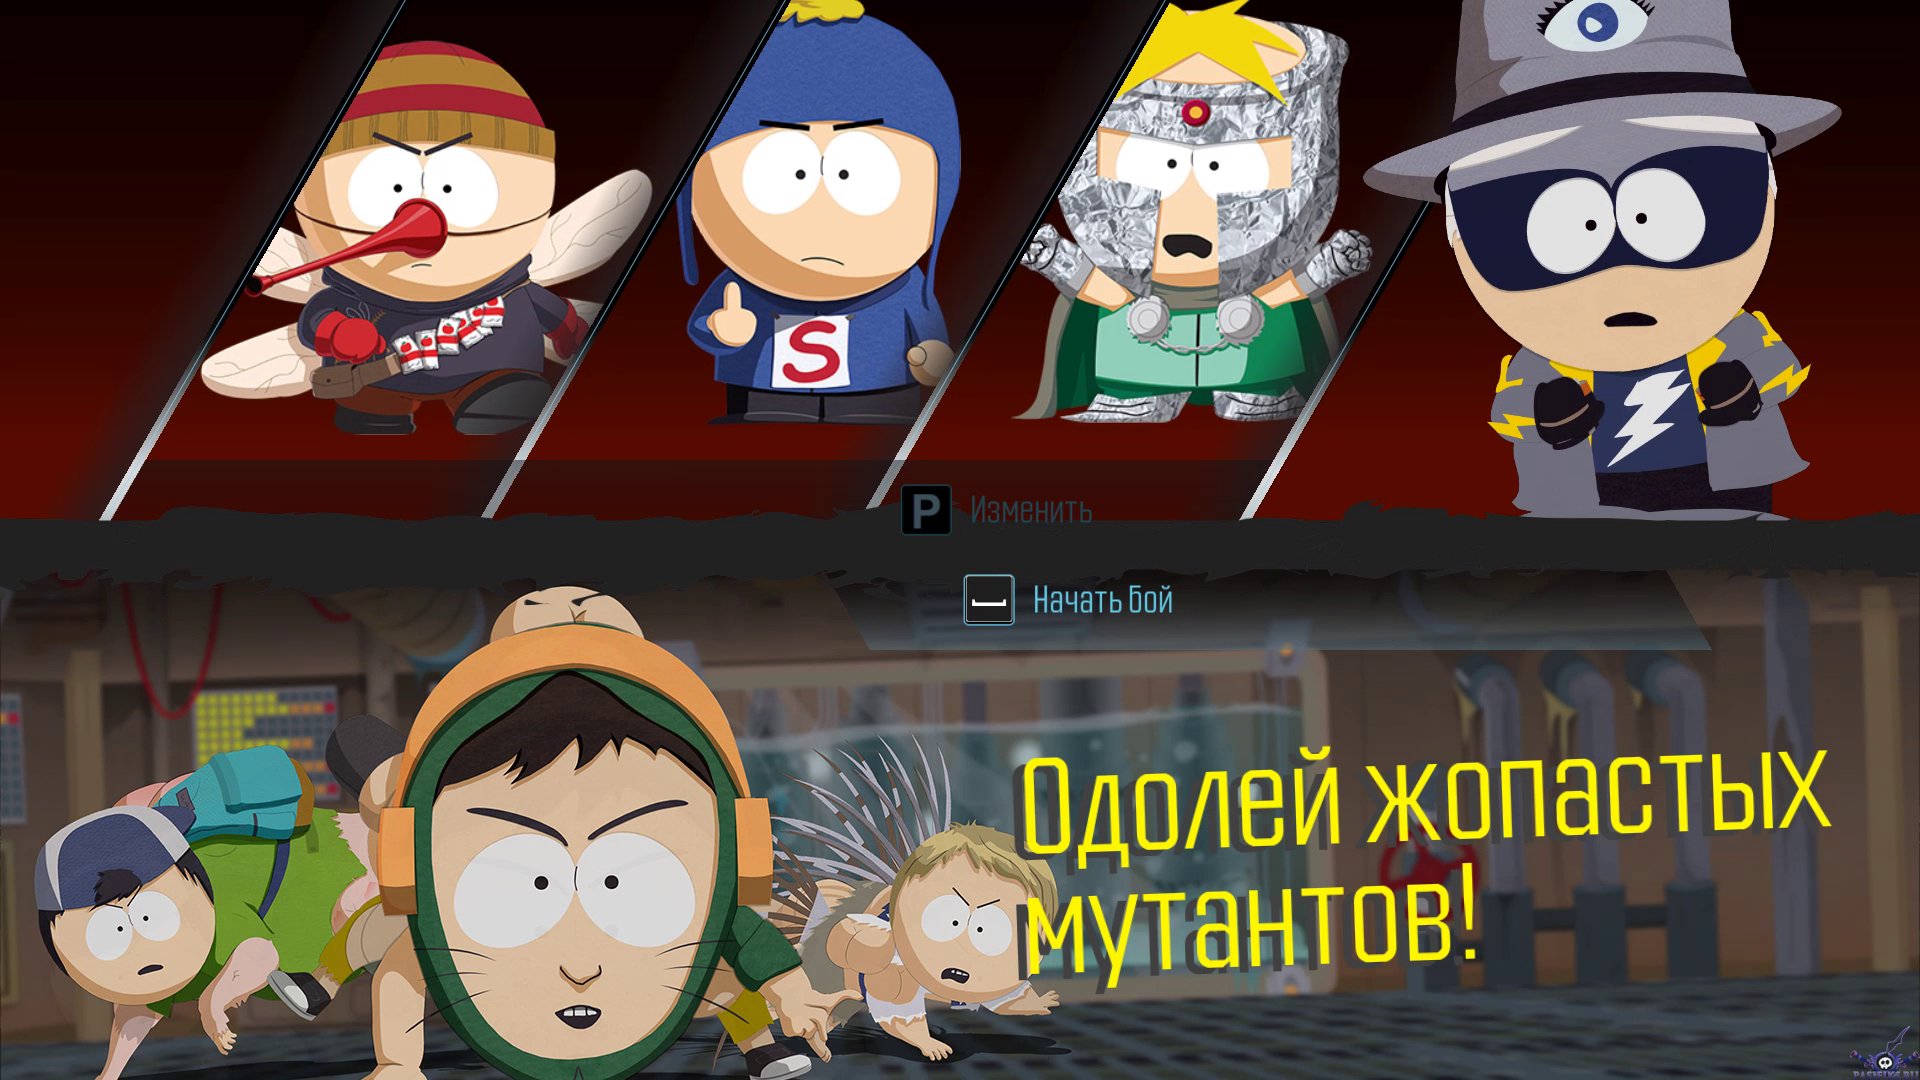 South park the fractured but whole купить ключ steam дешево фото 66